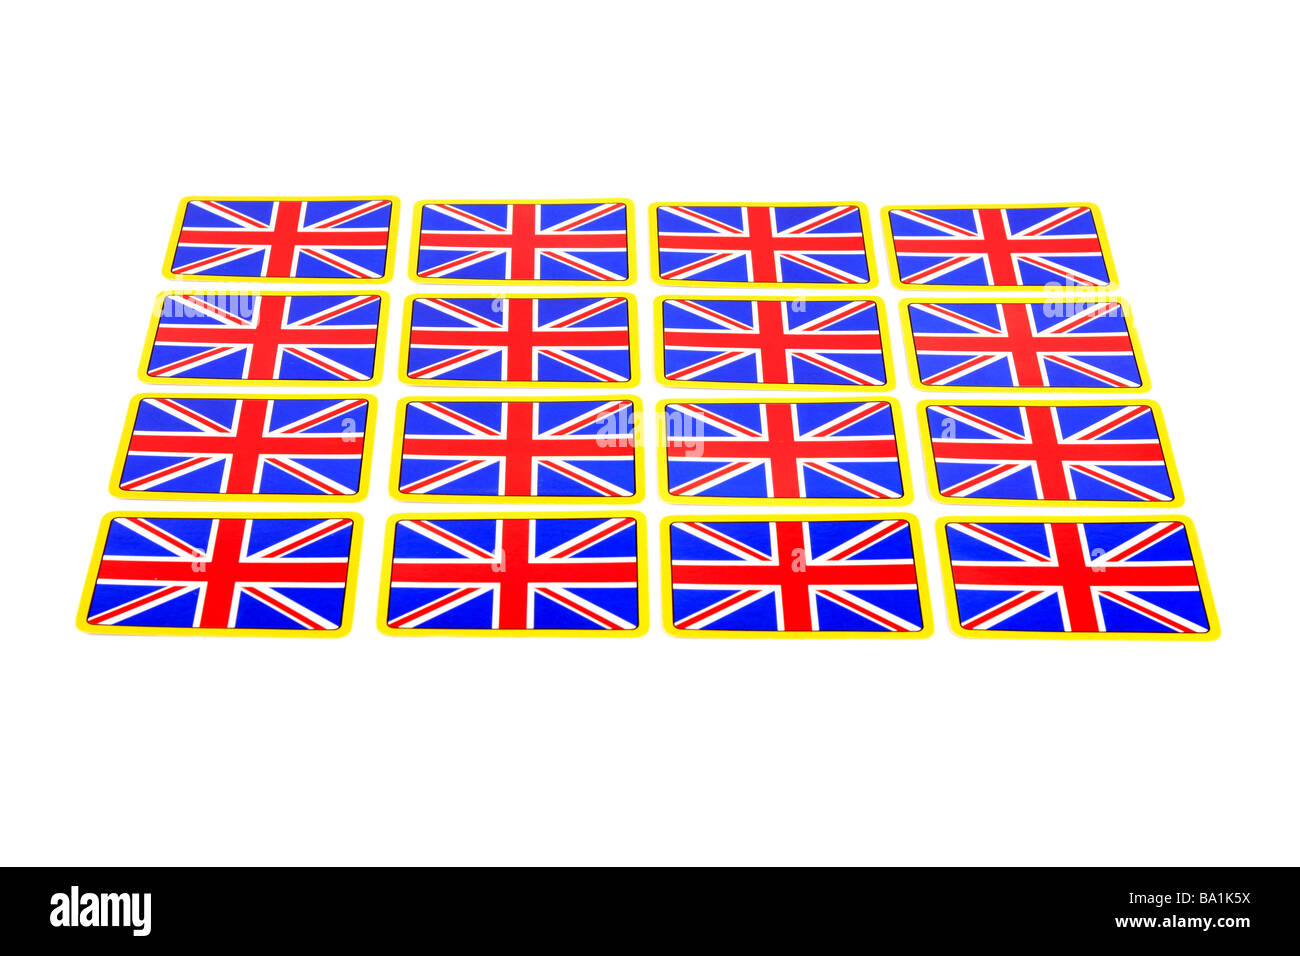 Playing cards with the British Union Jack flag on the back Stock Photo